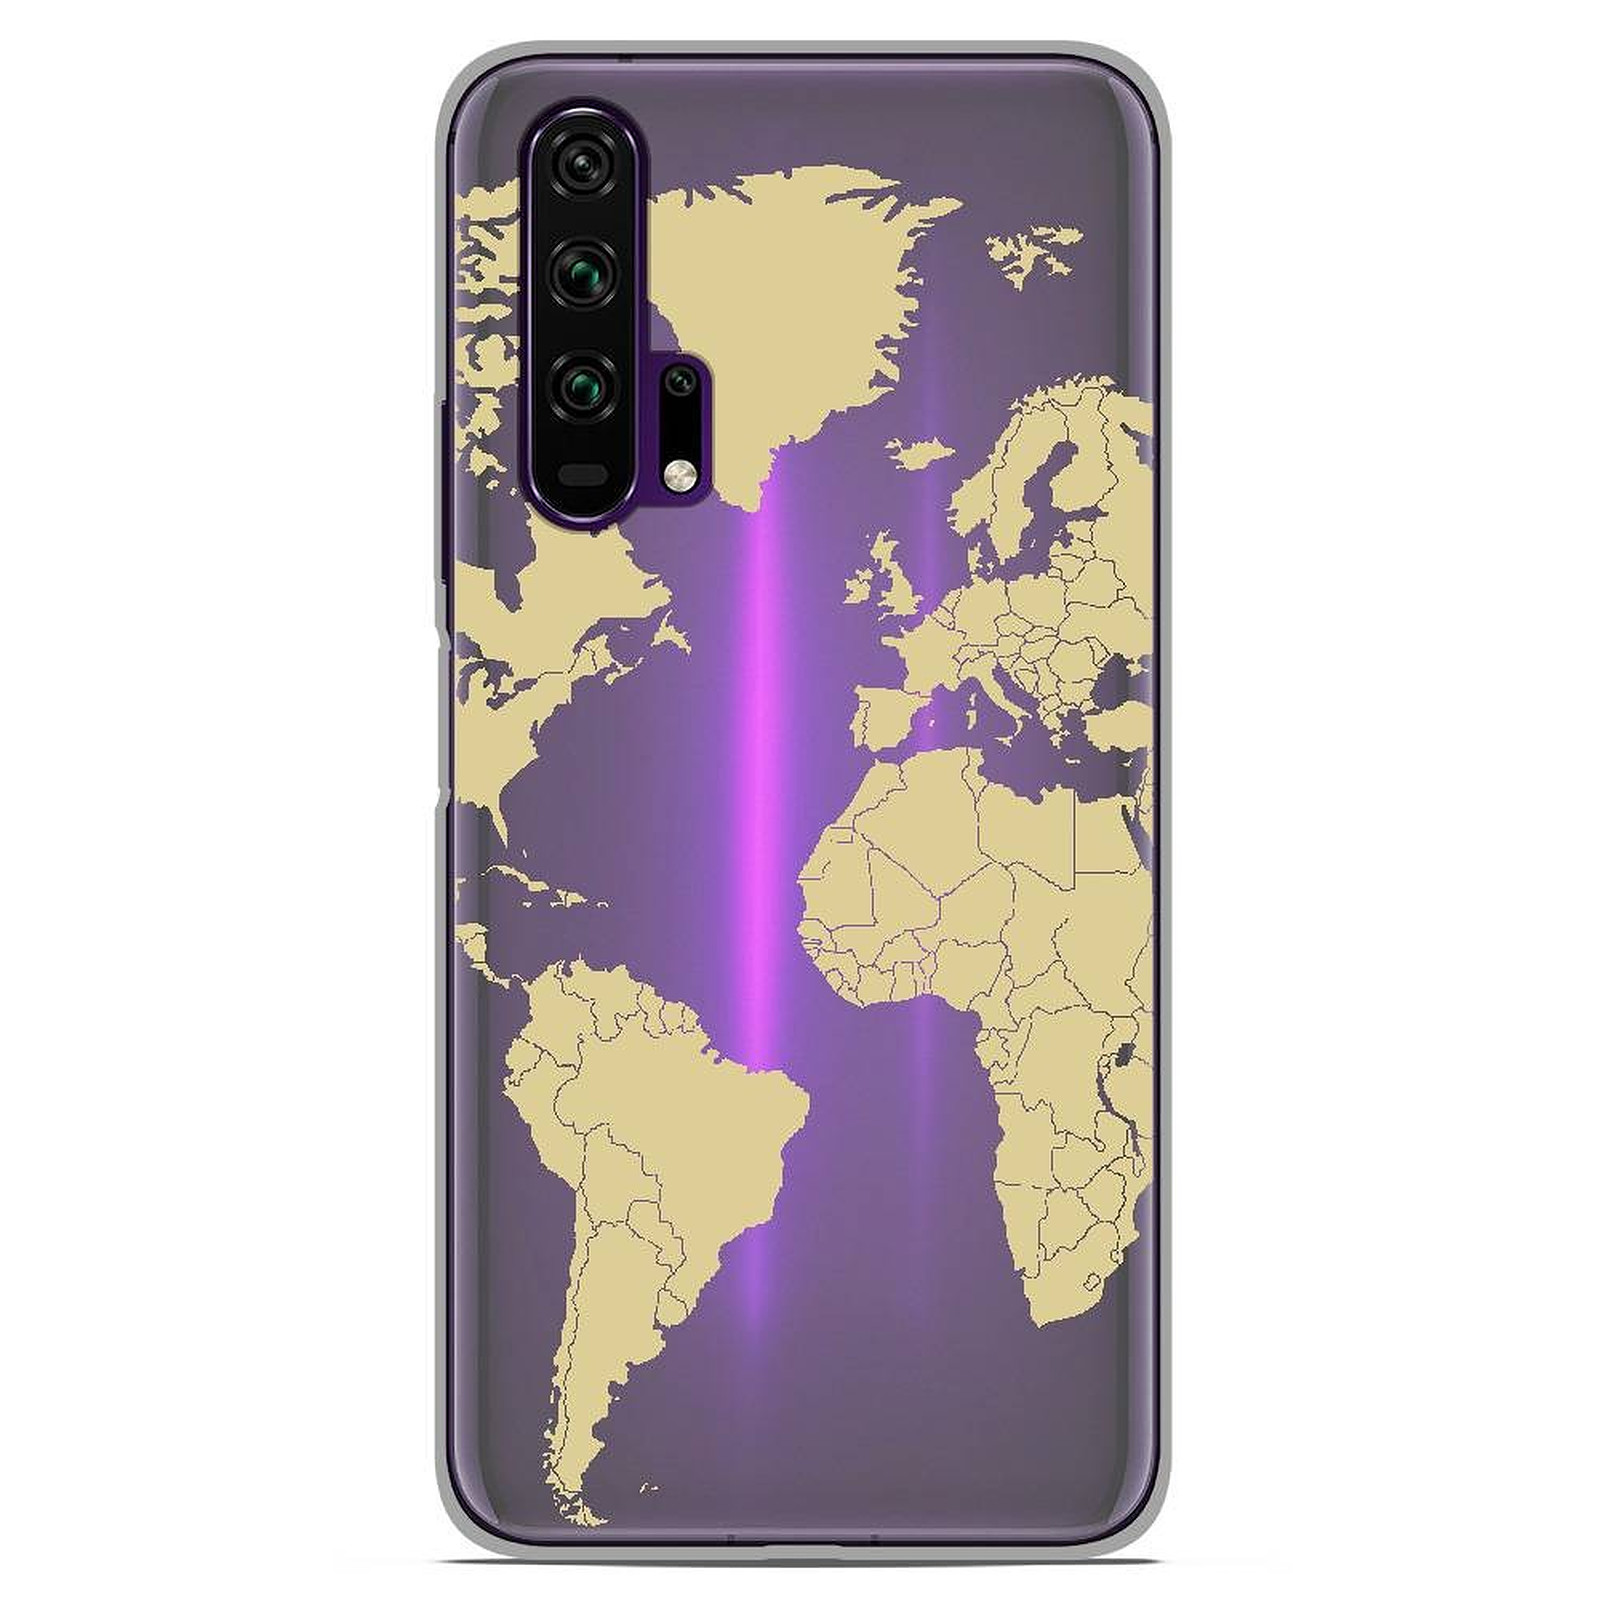 1001 Coques Coque silicone gel Huawei Honor 20 Pro motif Map beige - Coque telephone 1001Coques